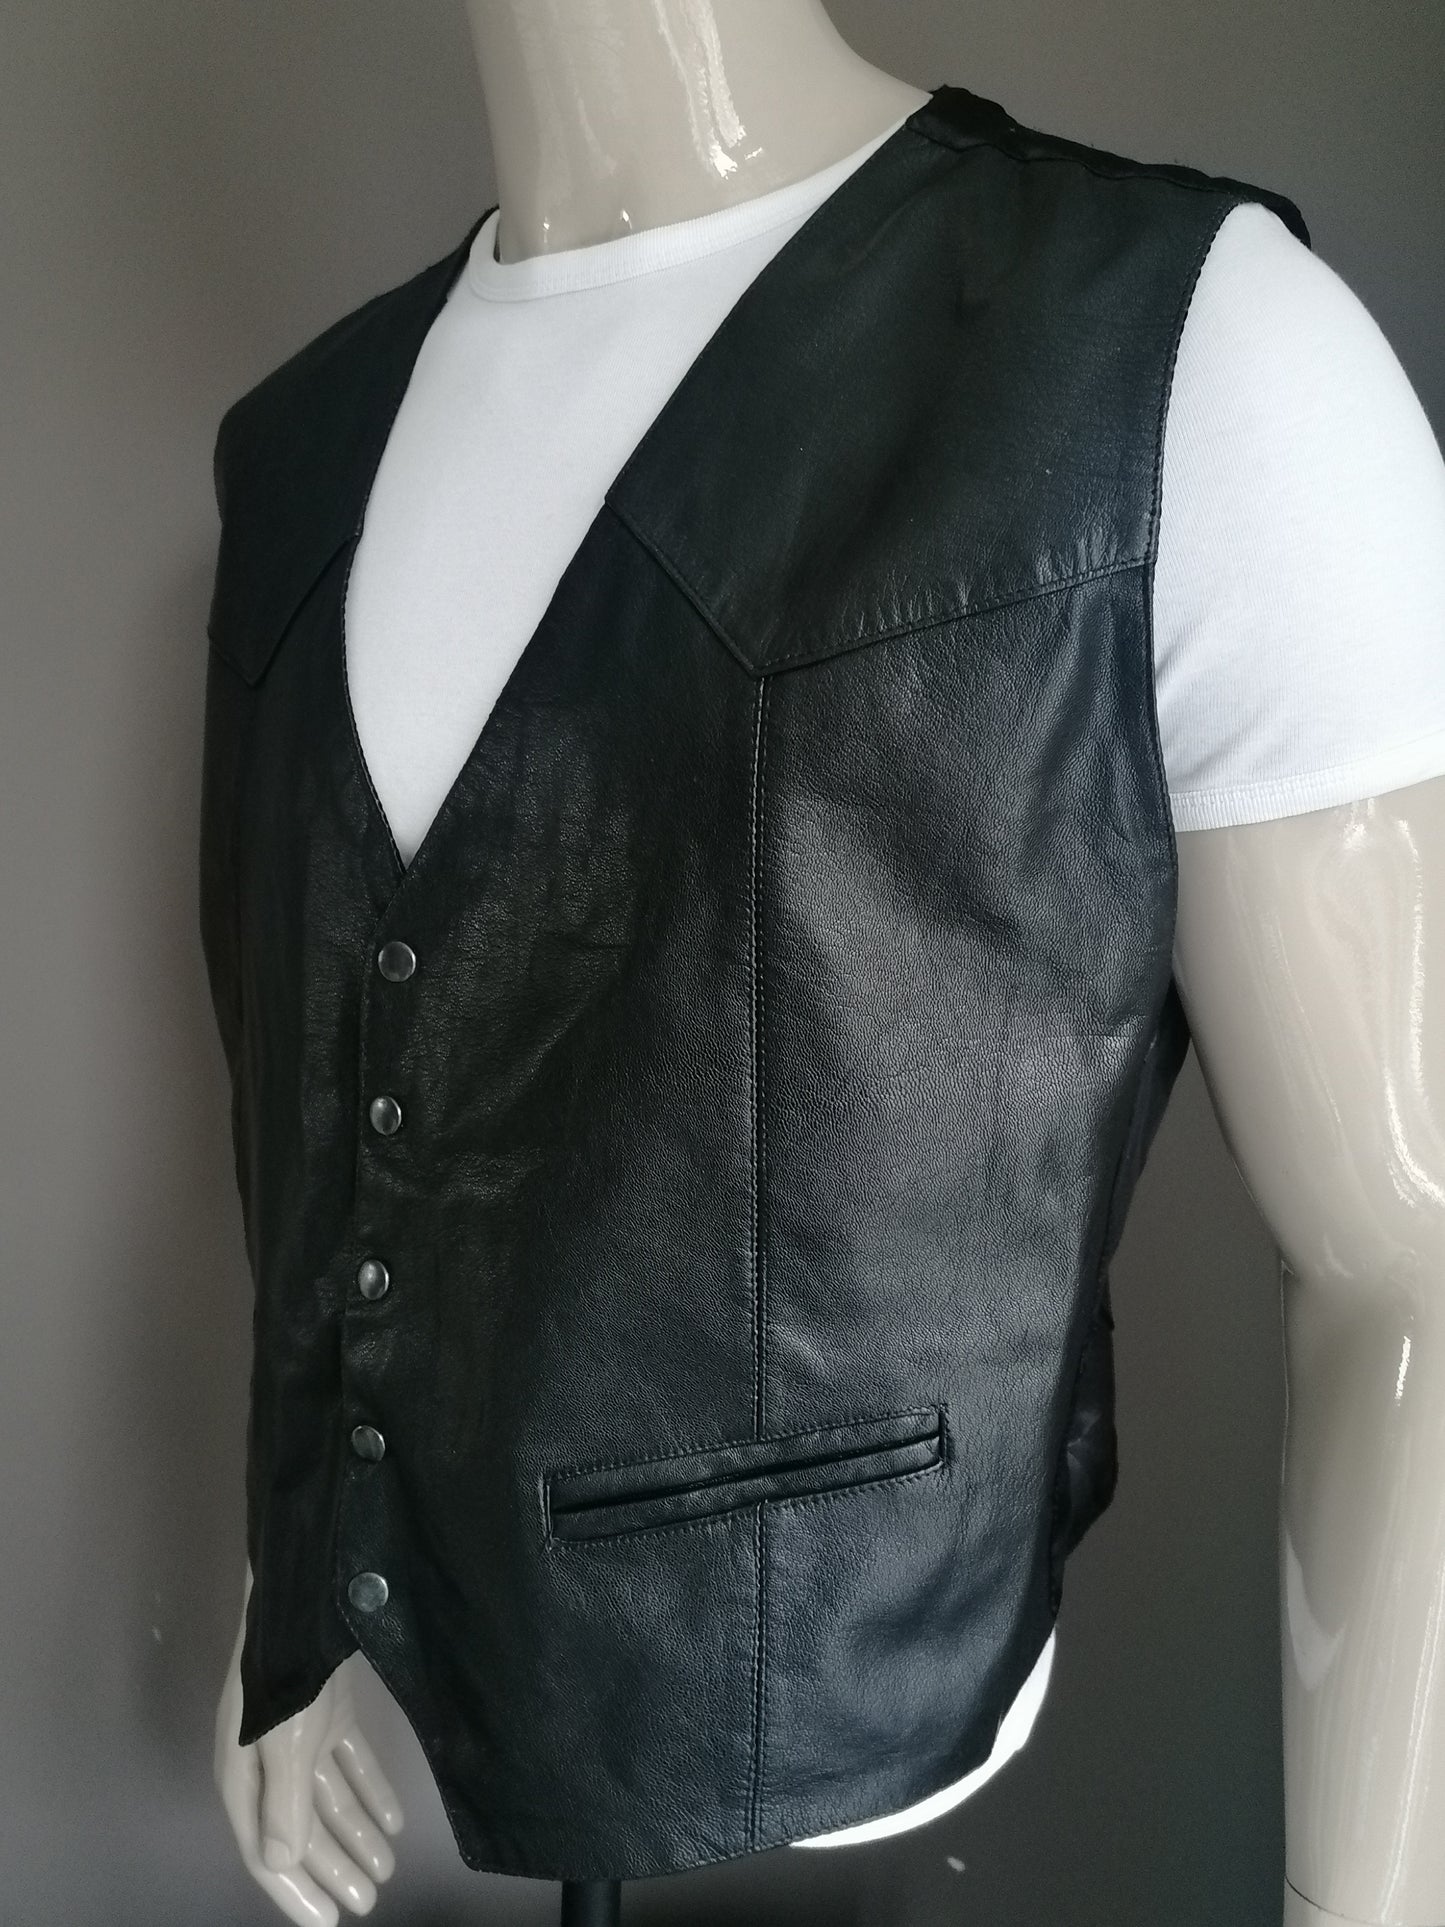 Goat leather waistcoat with press studs. Black colored. Size XL.